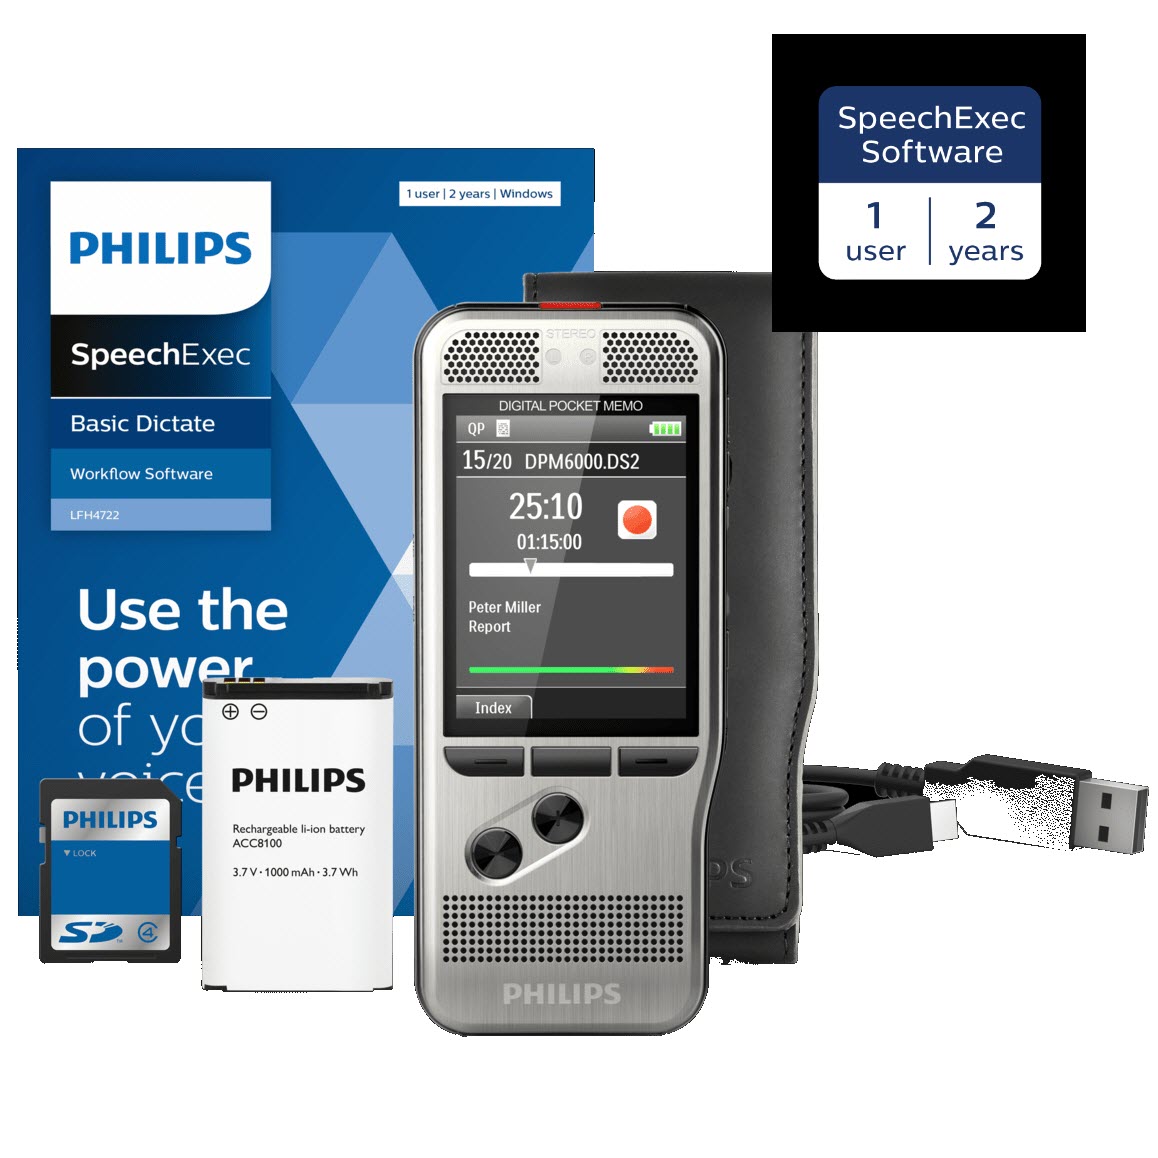 Philips DPM6000/02 Digital Pocket Memo Range Recorder with SpeechExec Dictate Workflow 2 year Subscription Software version 11.5 and Push Button Operation